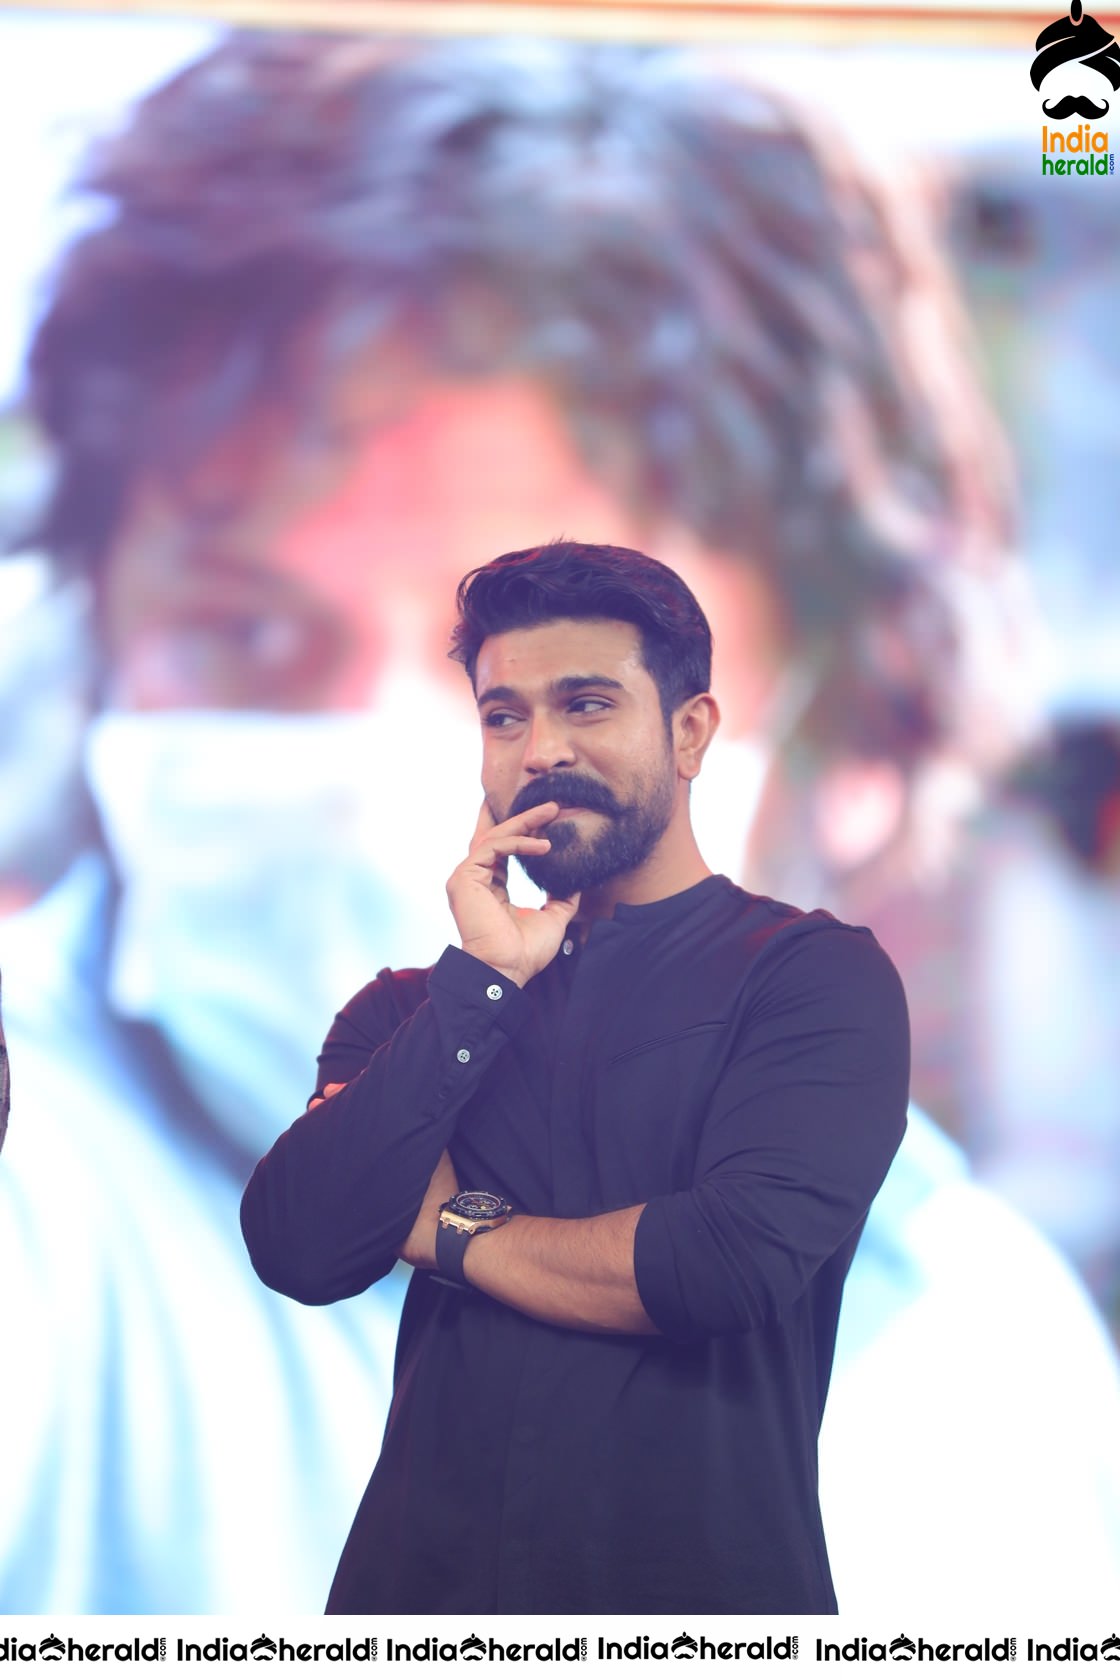 Unseen Candid Clicks of Ram Charan On the stage Set 2